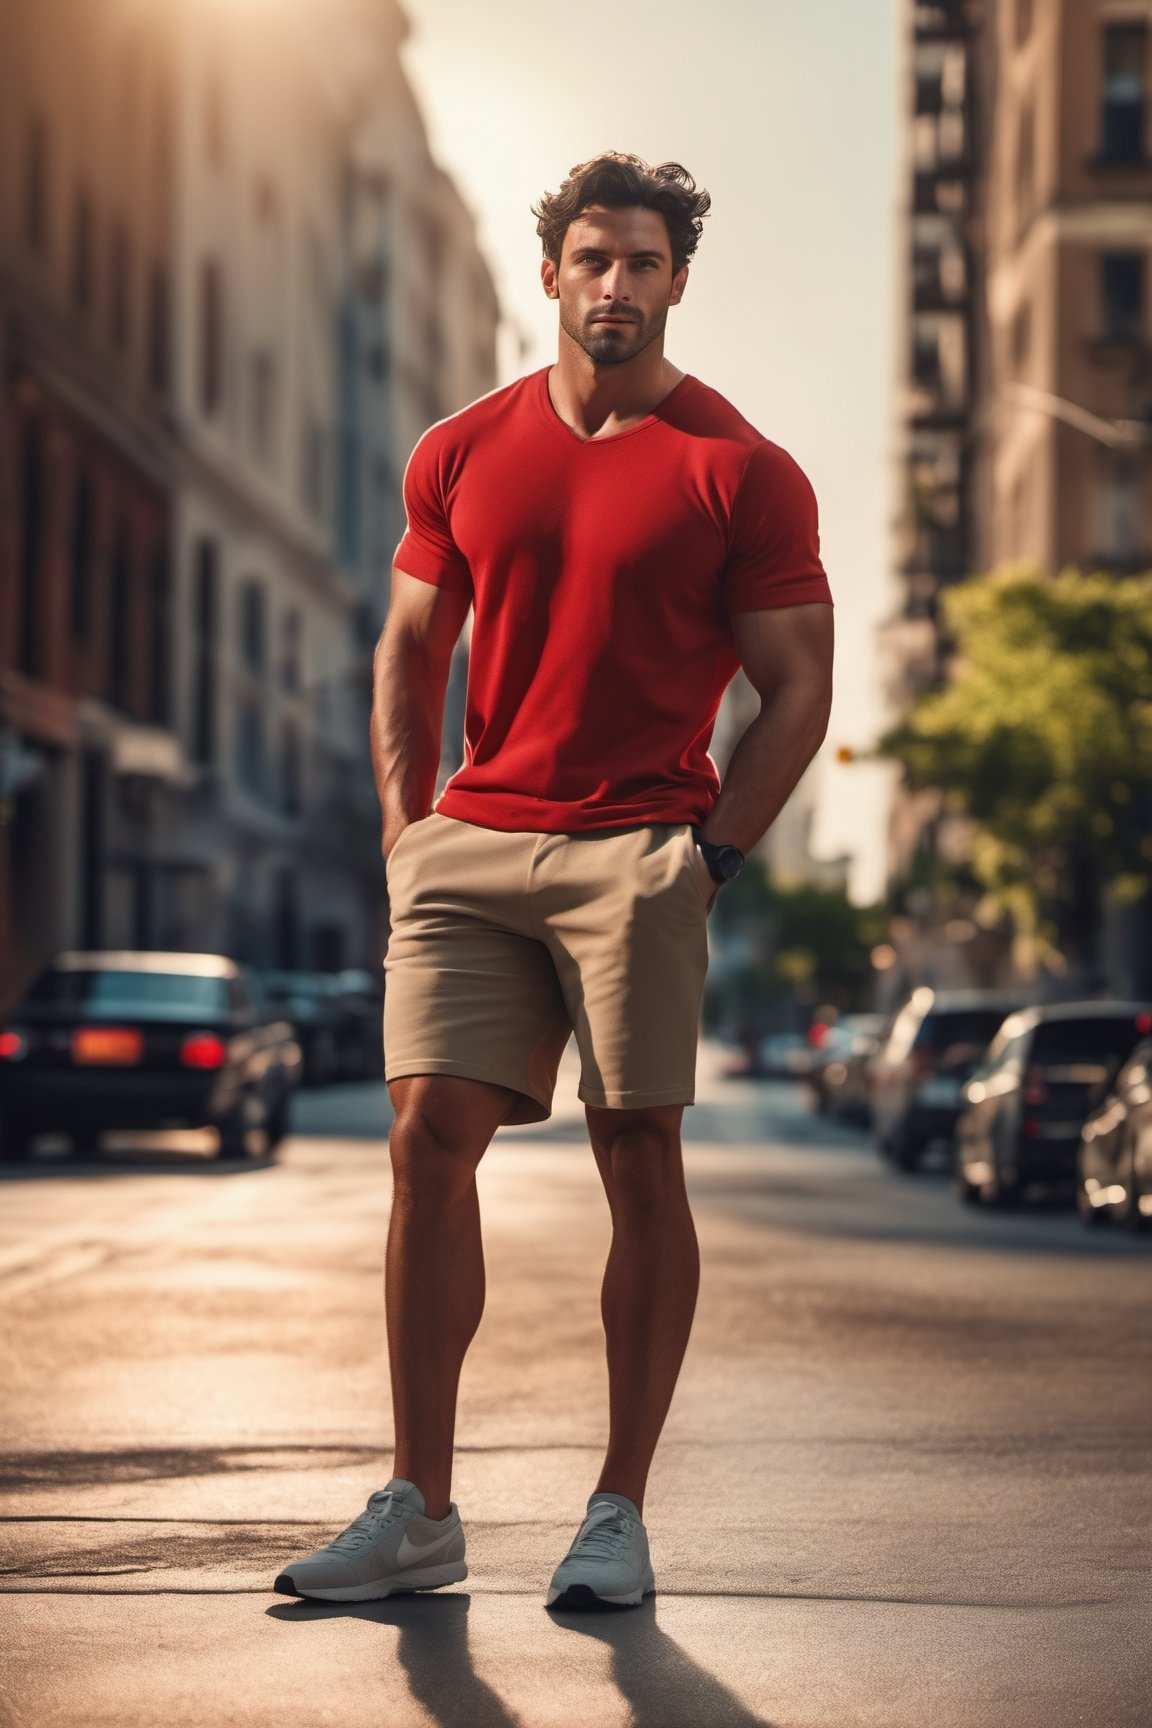 analog photorealistic photo of a man with short black wavy hair, muscular, perfect eyes, legs, wearing shorts, handsome, full body, city, soft diffused lighting, golden hour, eye level, RED Digital Cinema Camera